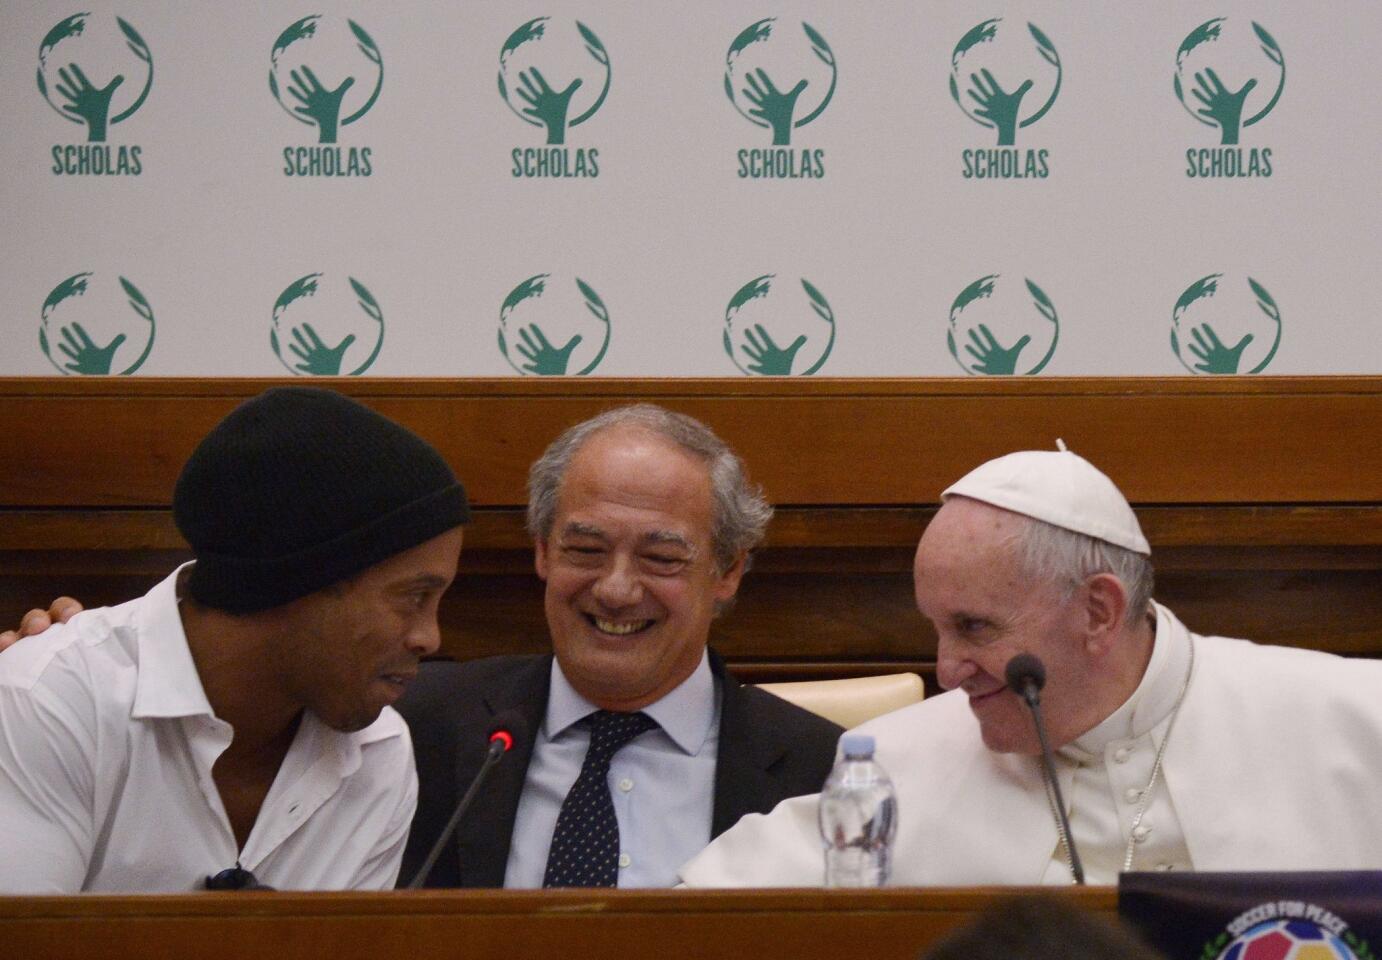 Brazilian football star Ronaldinho (L) arrives for a meeting with Pope Francis and the directors of "Scholas Occurentes" organization, to support a charity football match "For Peace" with international players, on February 3, 2016 at the Vatican. The "Scholas Occurrentes" organization is an international project based in Argentina that brings together schools and educational networks from different cultures and beliefs. AFP PHOTO / TIZIANA FABITIZIANA FABI/AFP/Getty Images ** OUTS - ELSENT, FPG, CM - OUTS * NM, PH, VA if sourced by CT, LA or MoD **